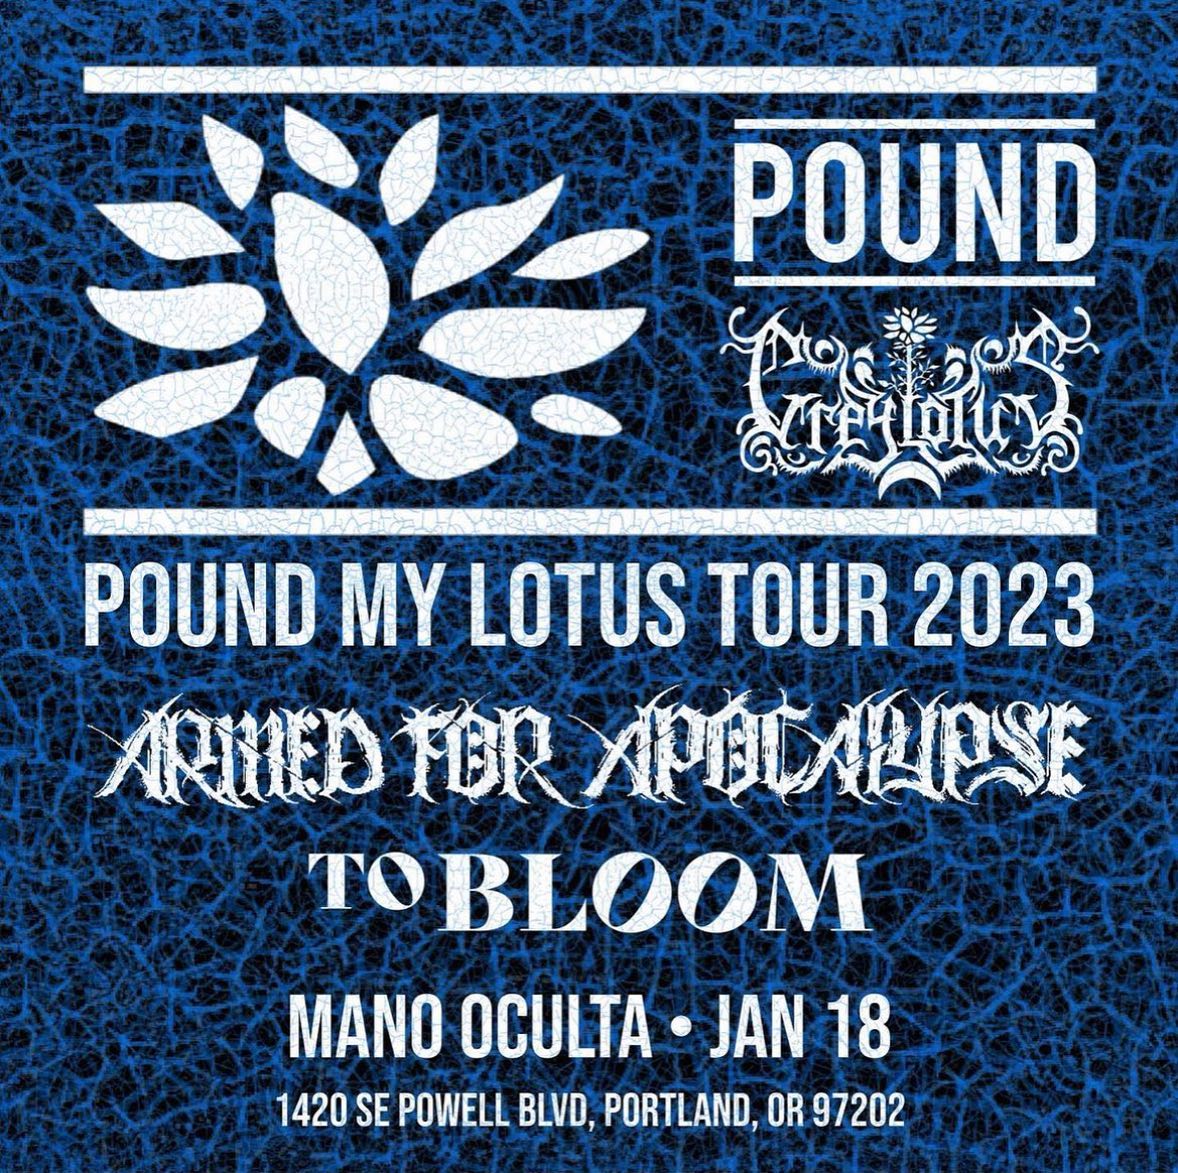 Armed For Apocalypse, Pound, Greylotus and To Bloom